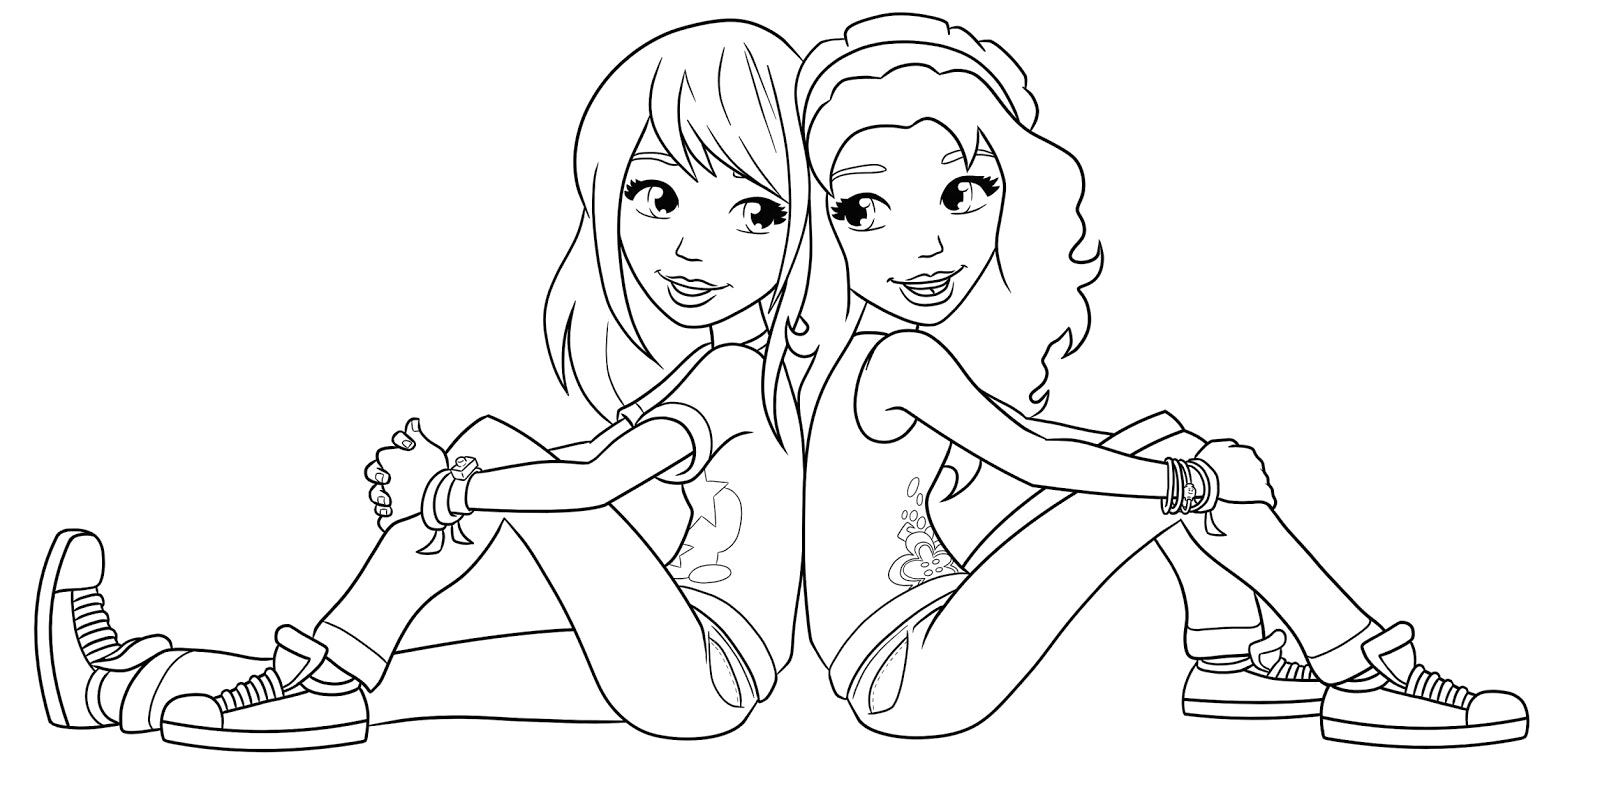 The best free Bff coloring page images. Download from 141 free coloring